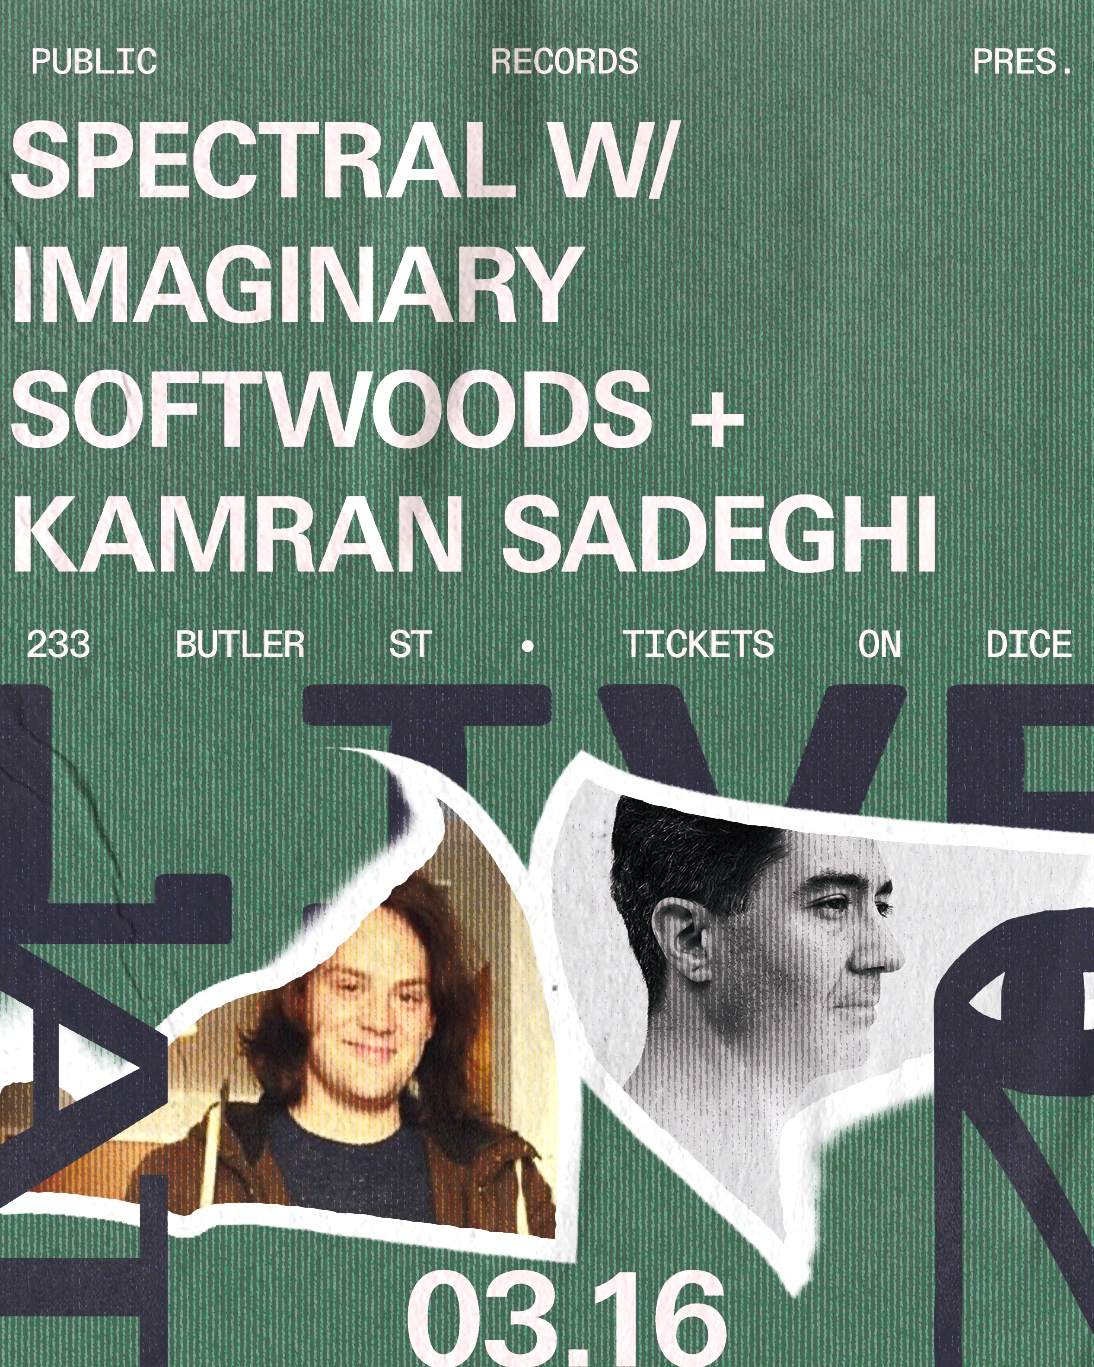 Spectral with Imaginary Softwoods + Kamran Sadeghi - フライヤー表